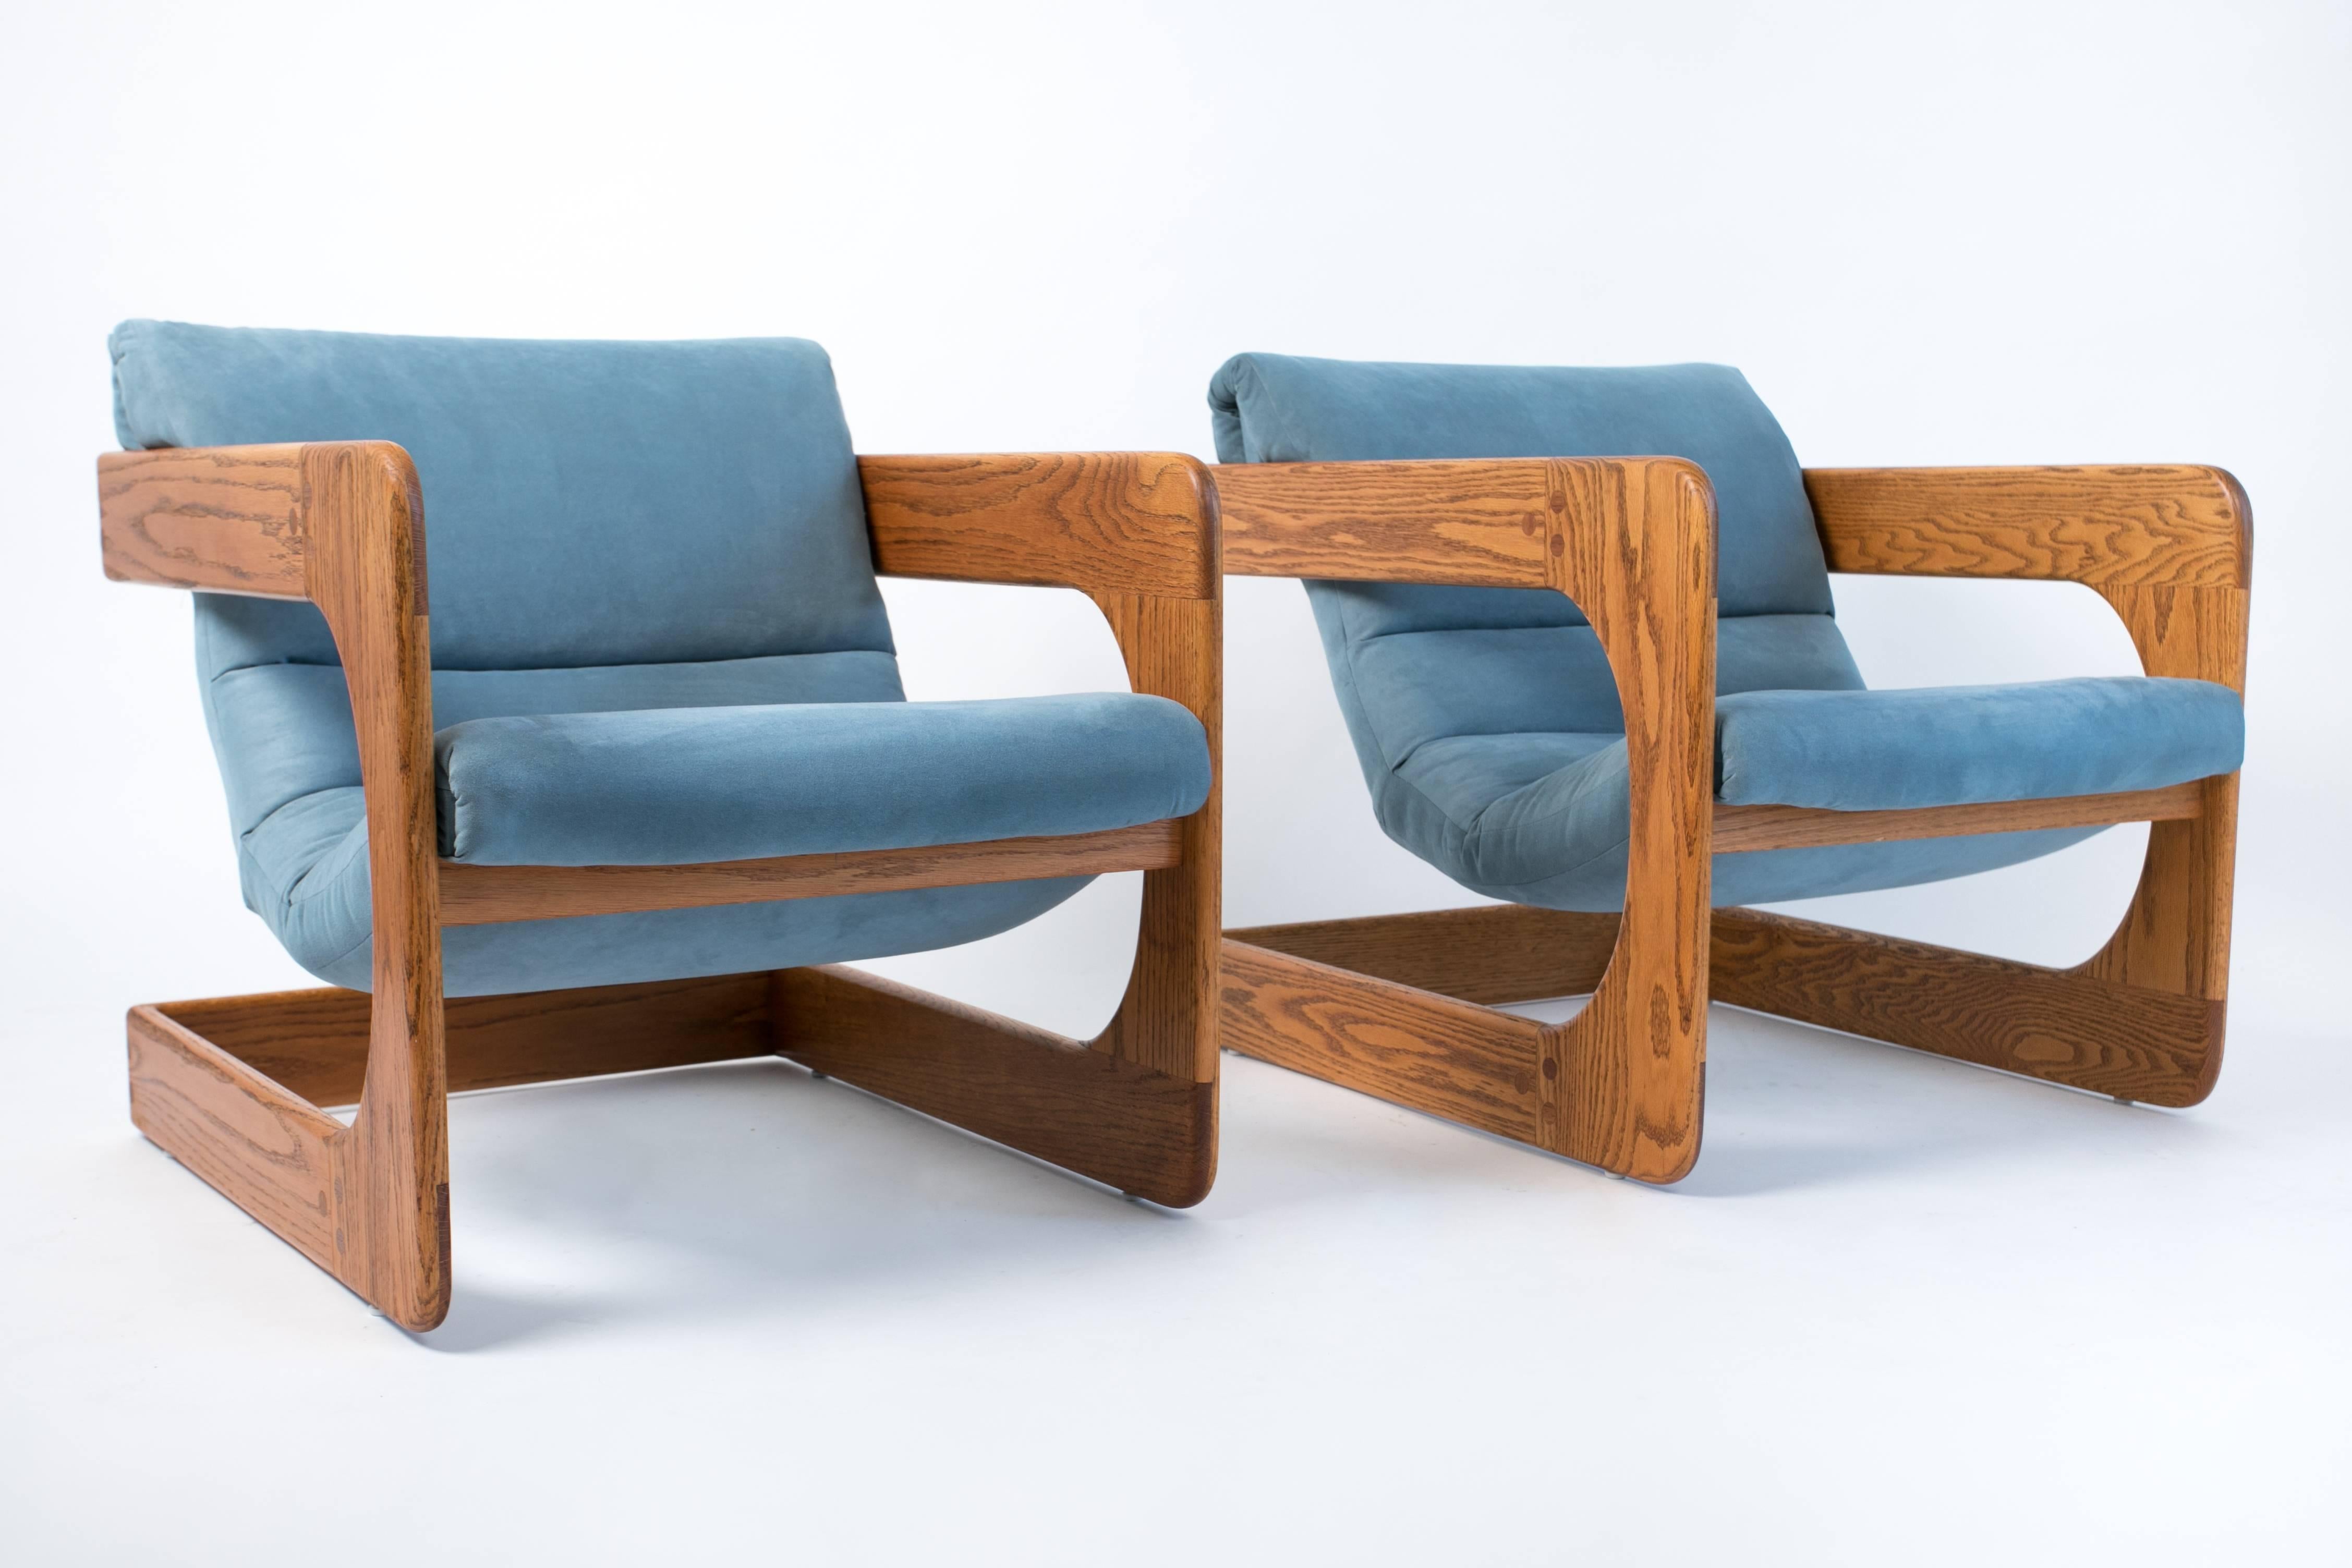 A pair of cantilevered lounge chairs from San Diego designer Lou Hodges for manufacturer California Design Group, who specialized in butcher block and modular furniture. Featured in the “California Design 76” exhibition, these chairs are constructed